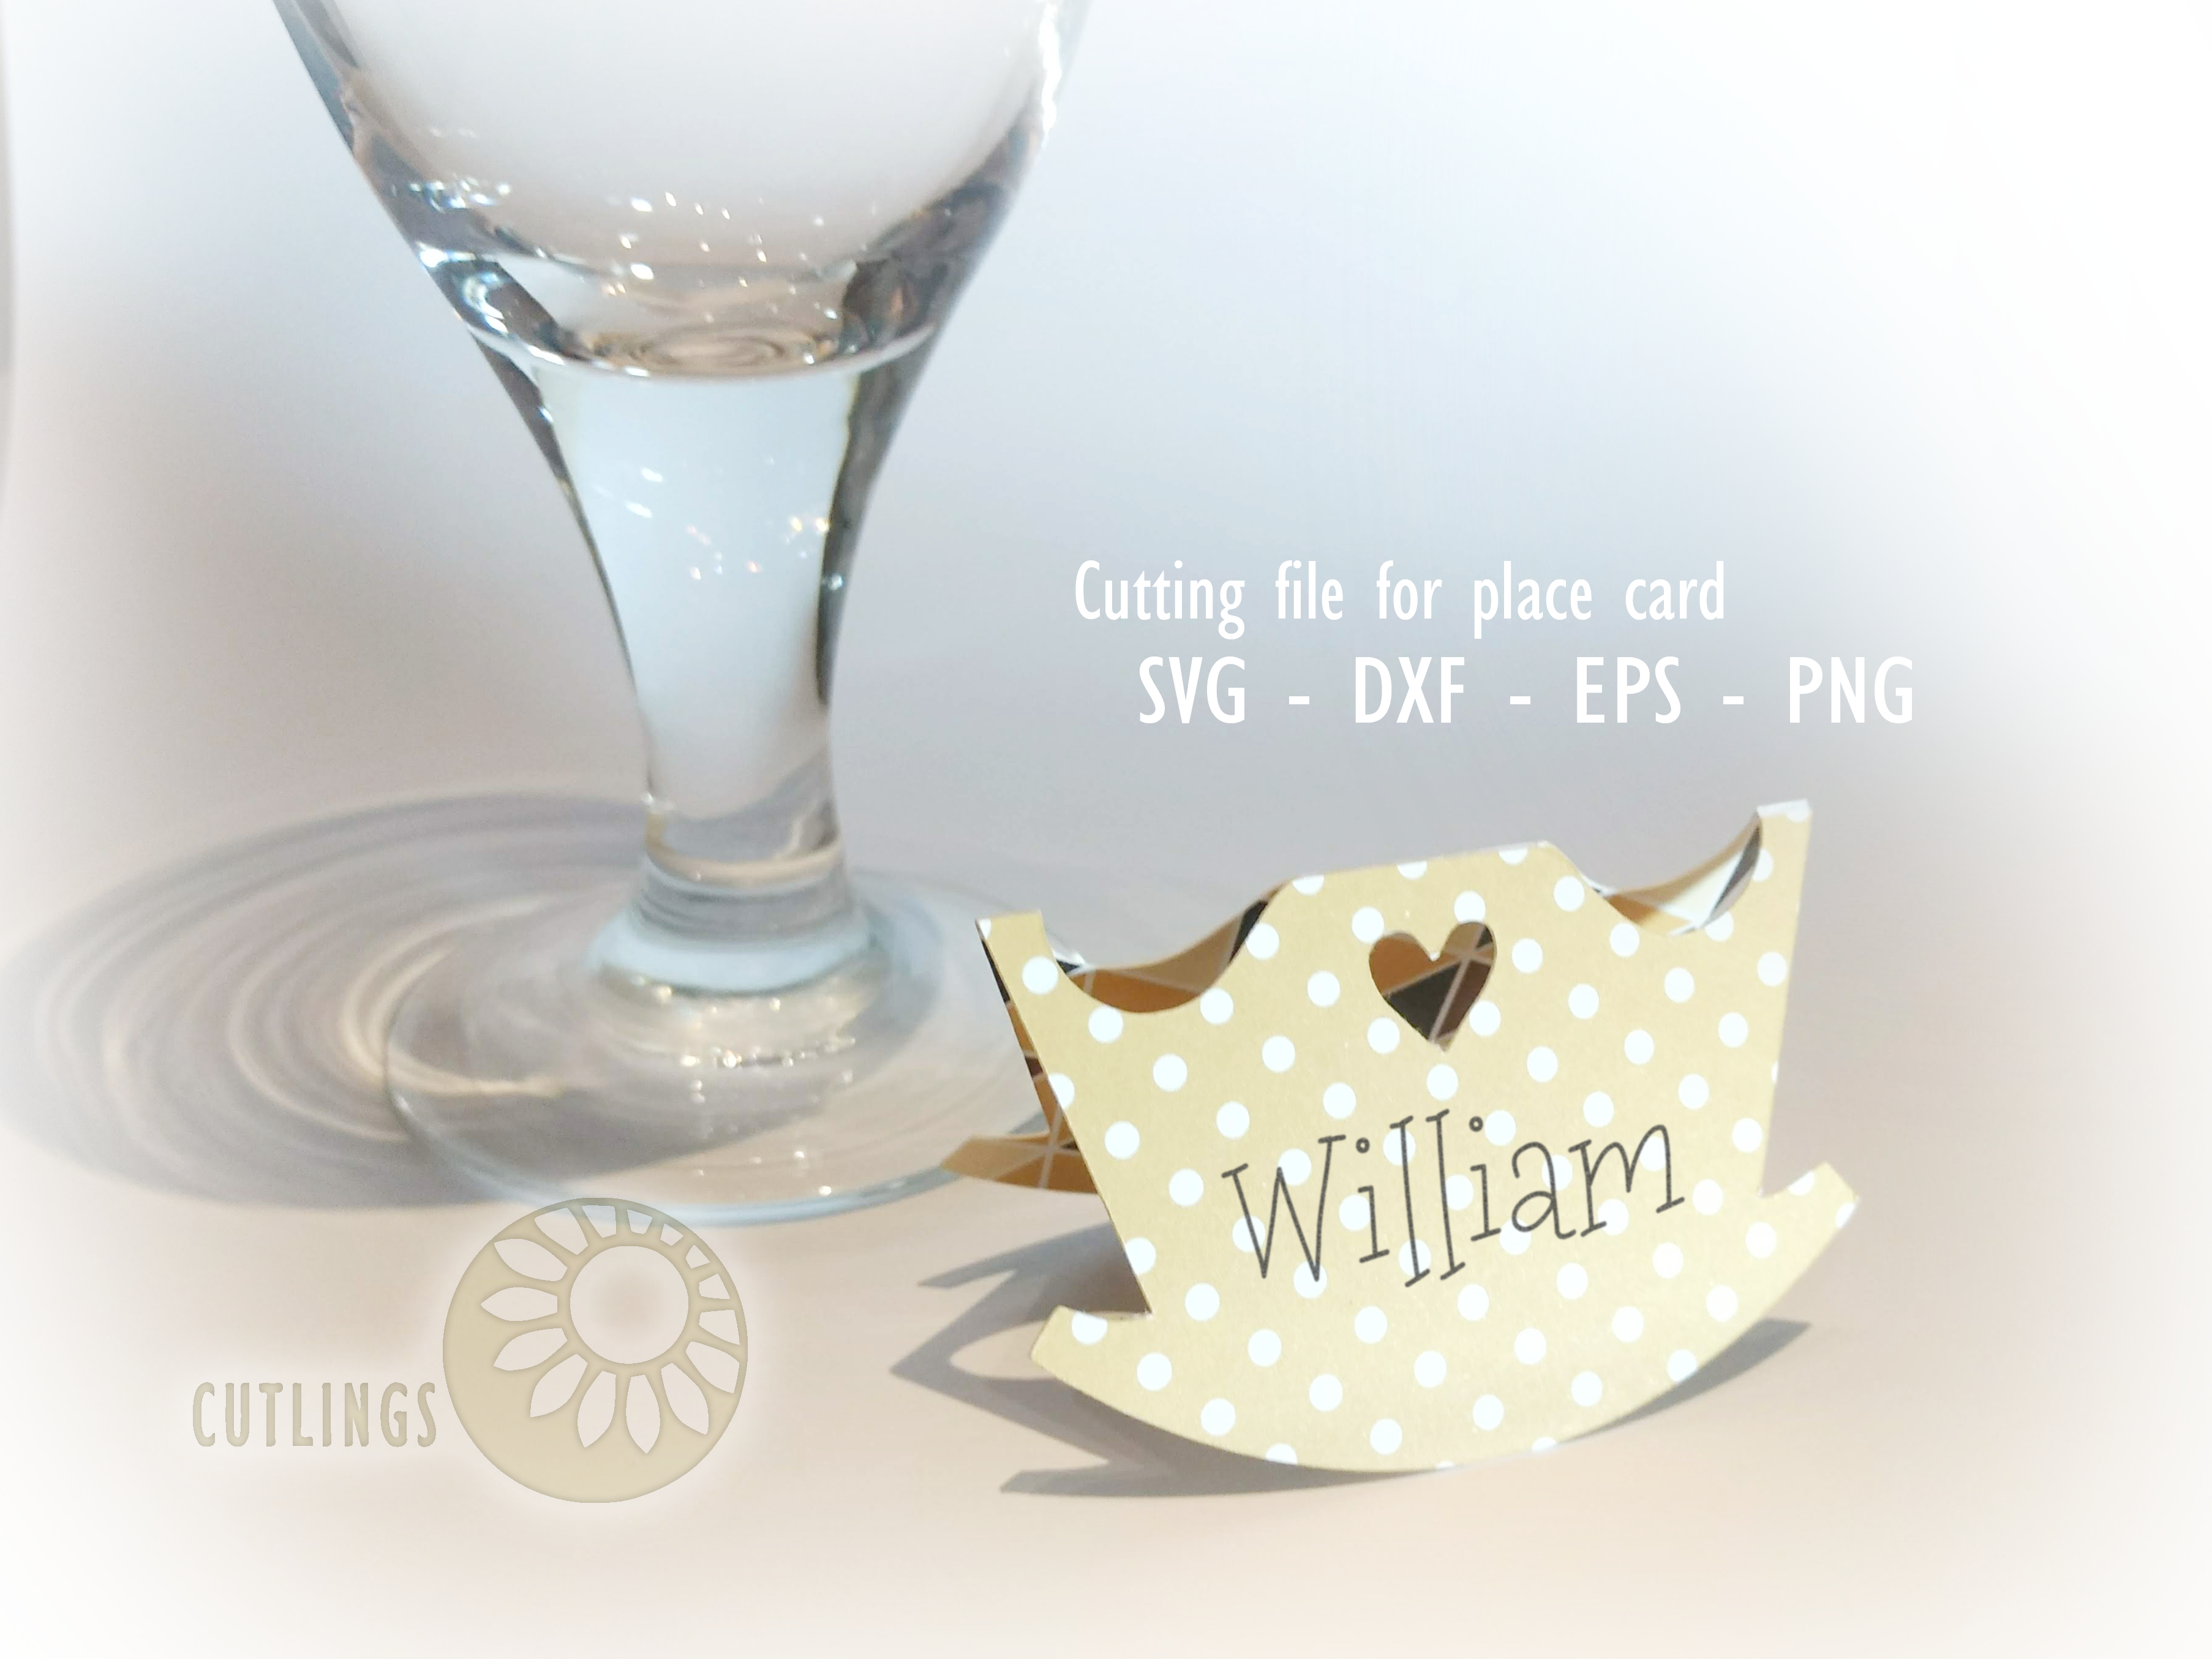 Place card for party to celebrate the baby - a cradle